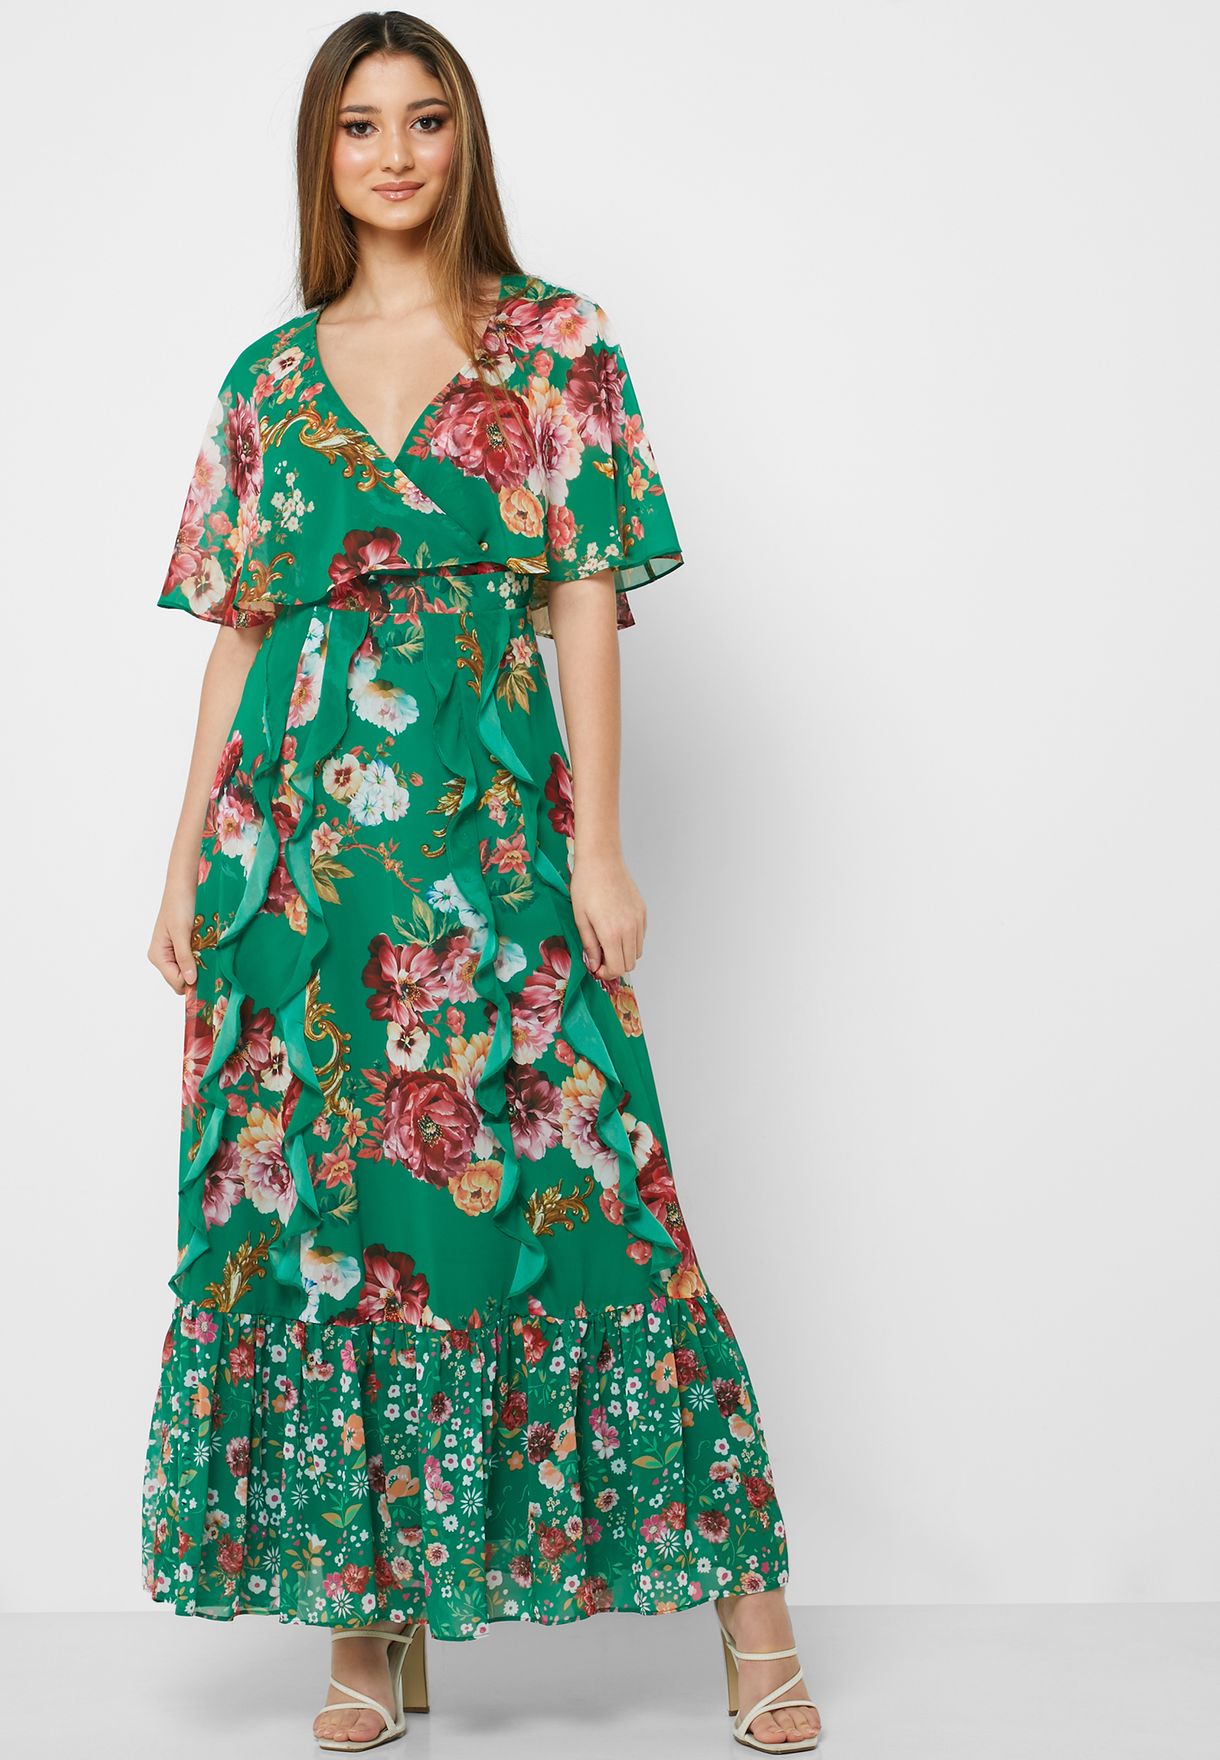 Buy Iconic prints Floral Dress for ...